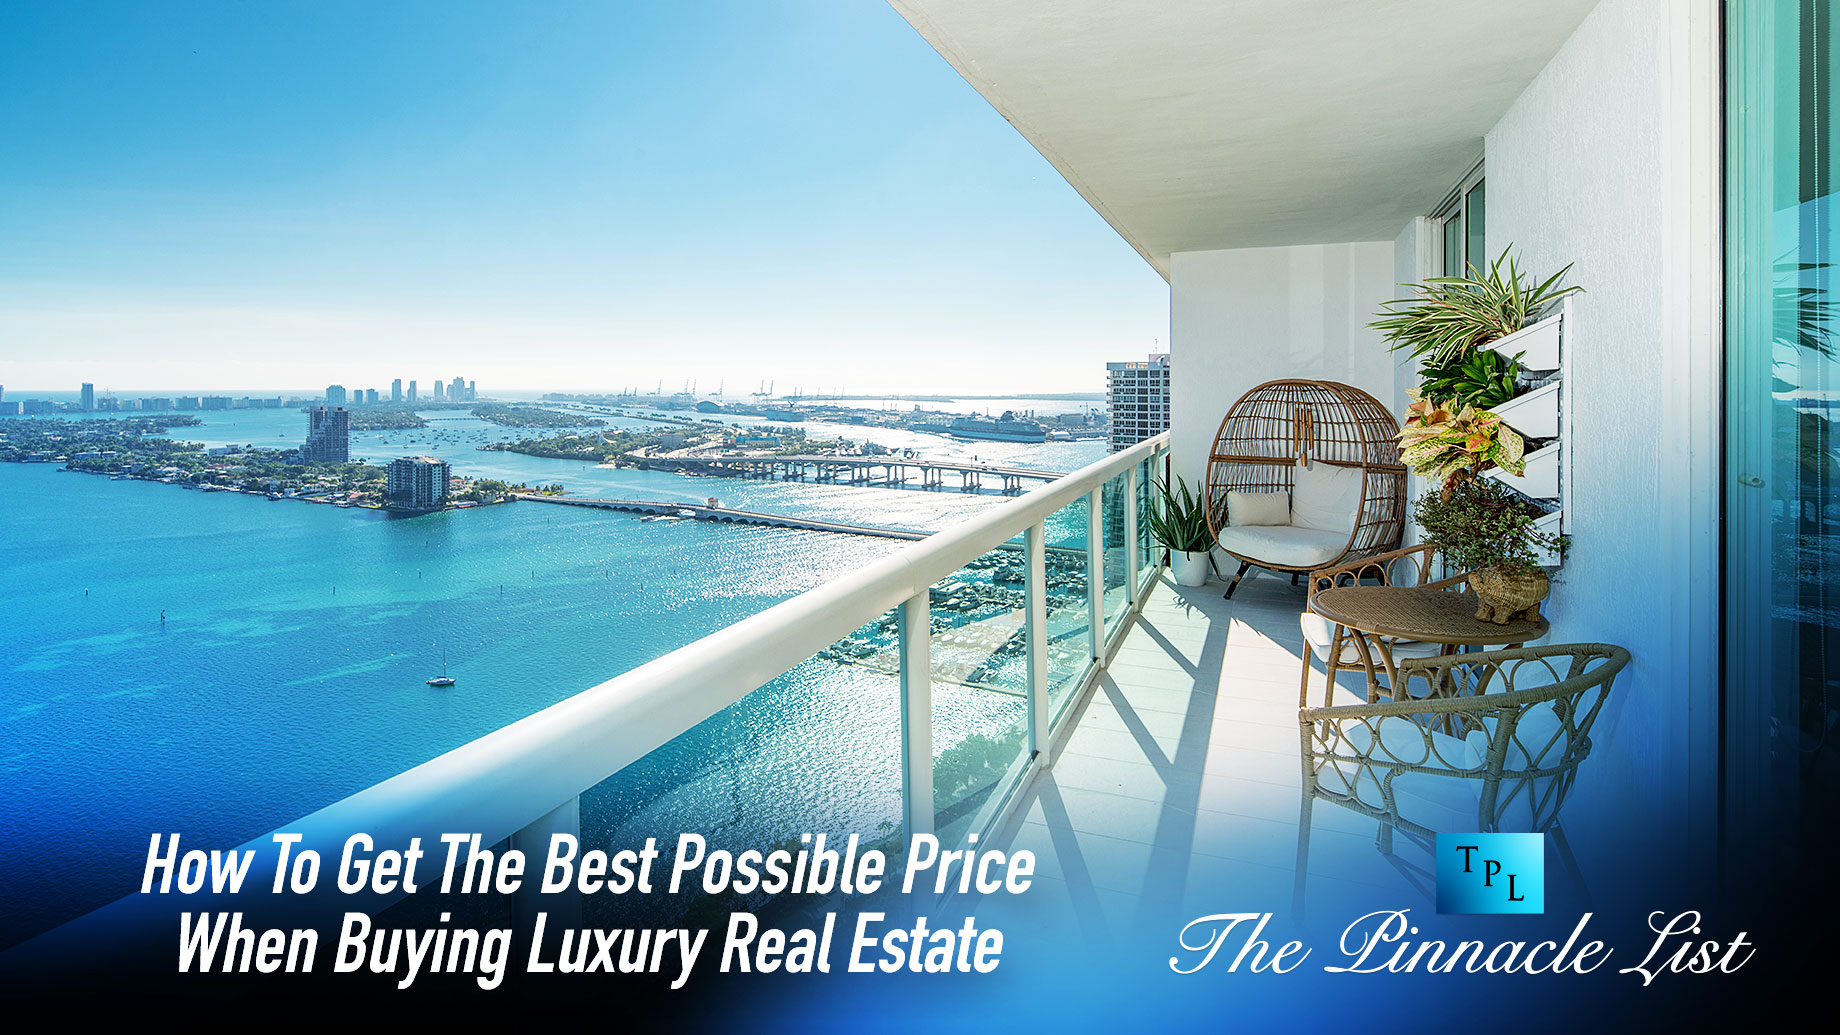 How To Get The Best Possible Price When Buying Luxury Real Estate